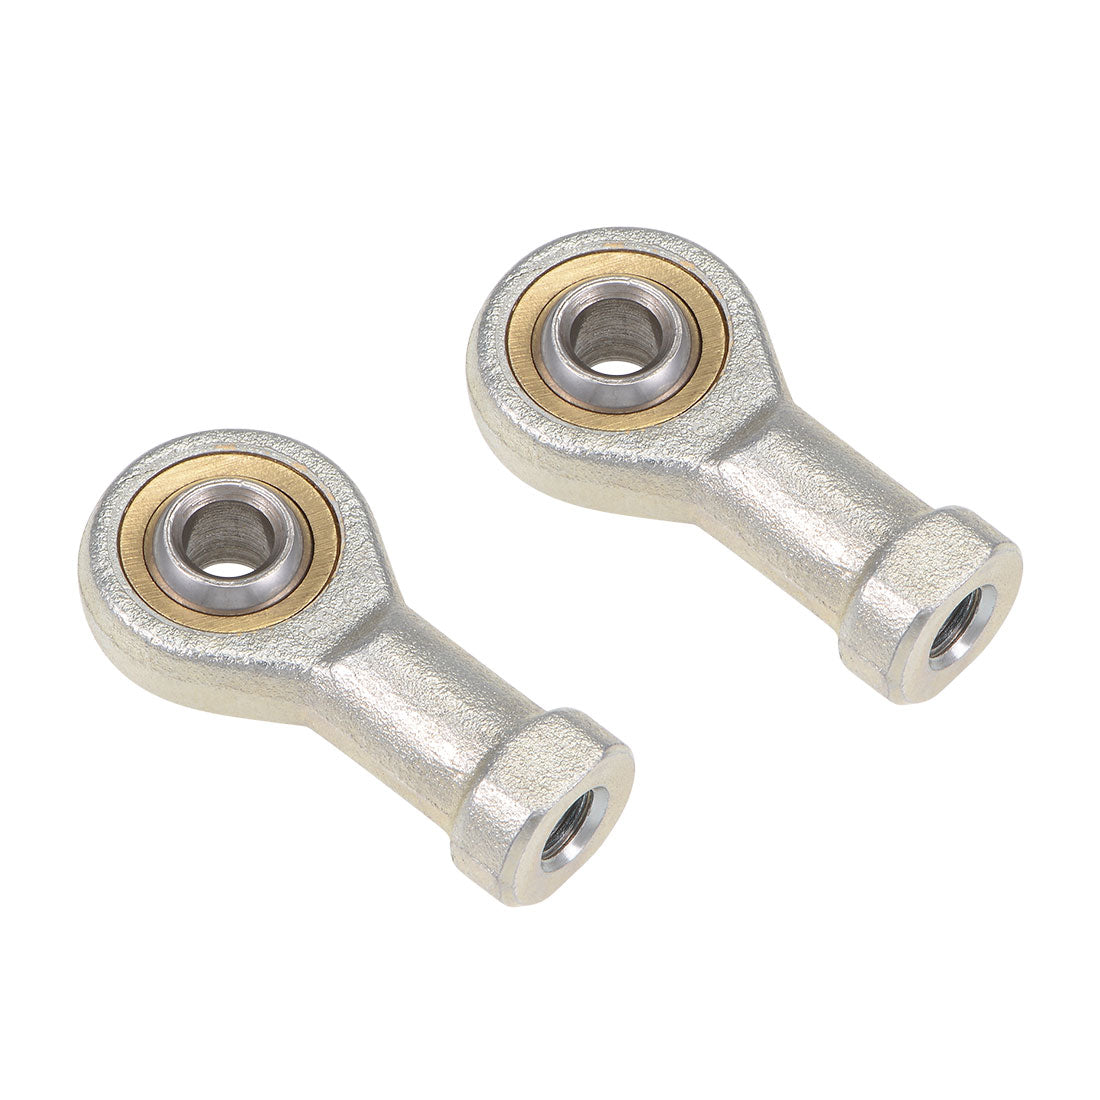 uxcell Uxcell 6mm Rod End Bearing M6x1.0mm Rod Ends Ball Joint Female Left Hand Thread 2pcs